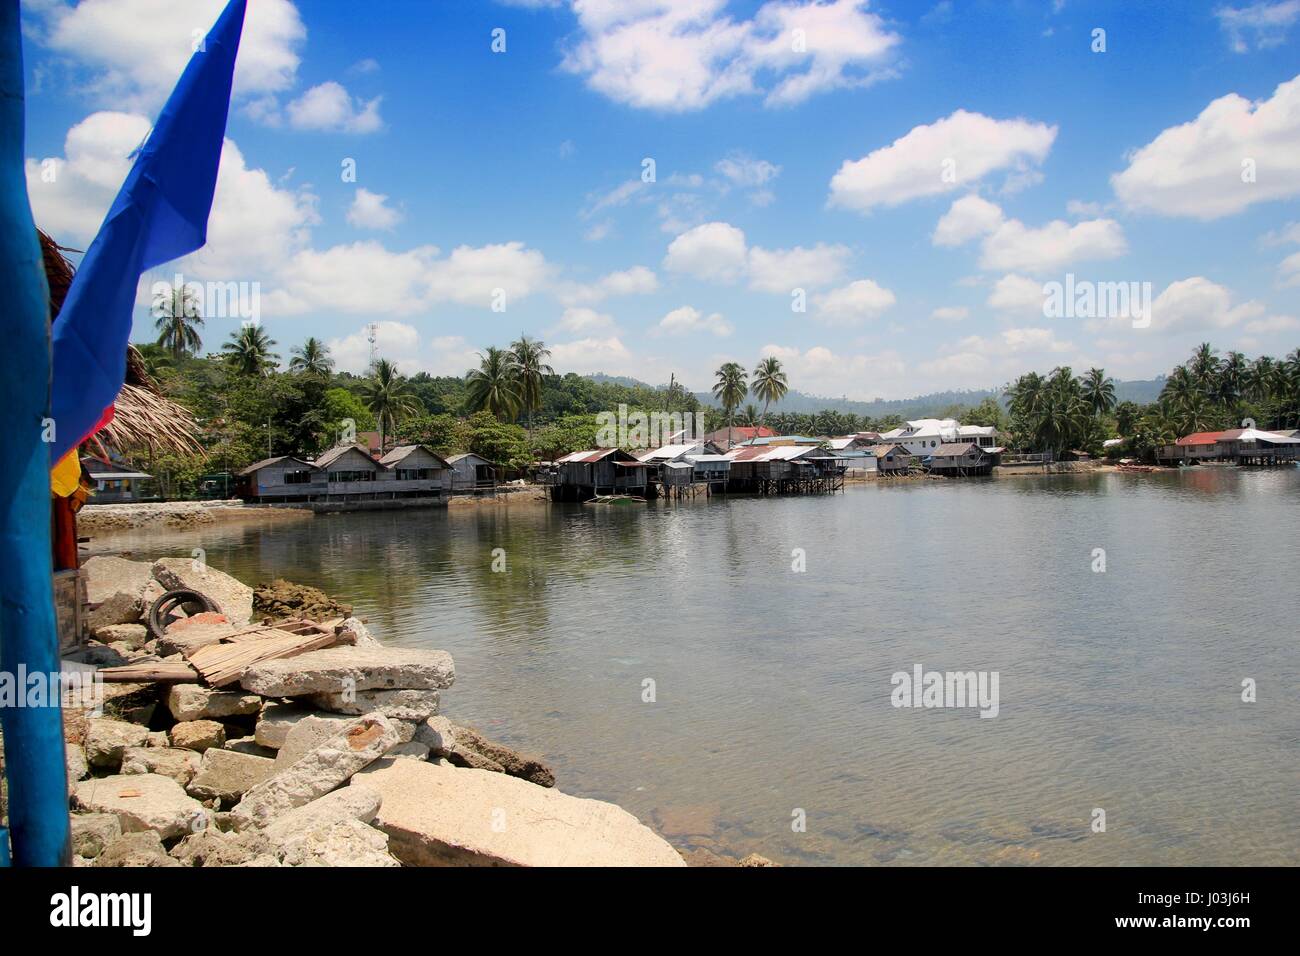 Fishing village, Barangay Lianga, Surigao del Sur, Philippines Houses on the seaside, some on stilts are built directly above the water. Stock Photo